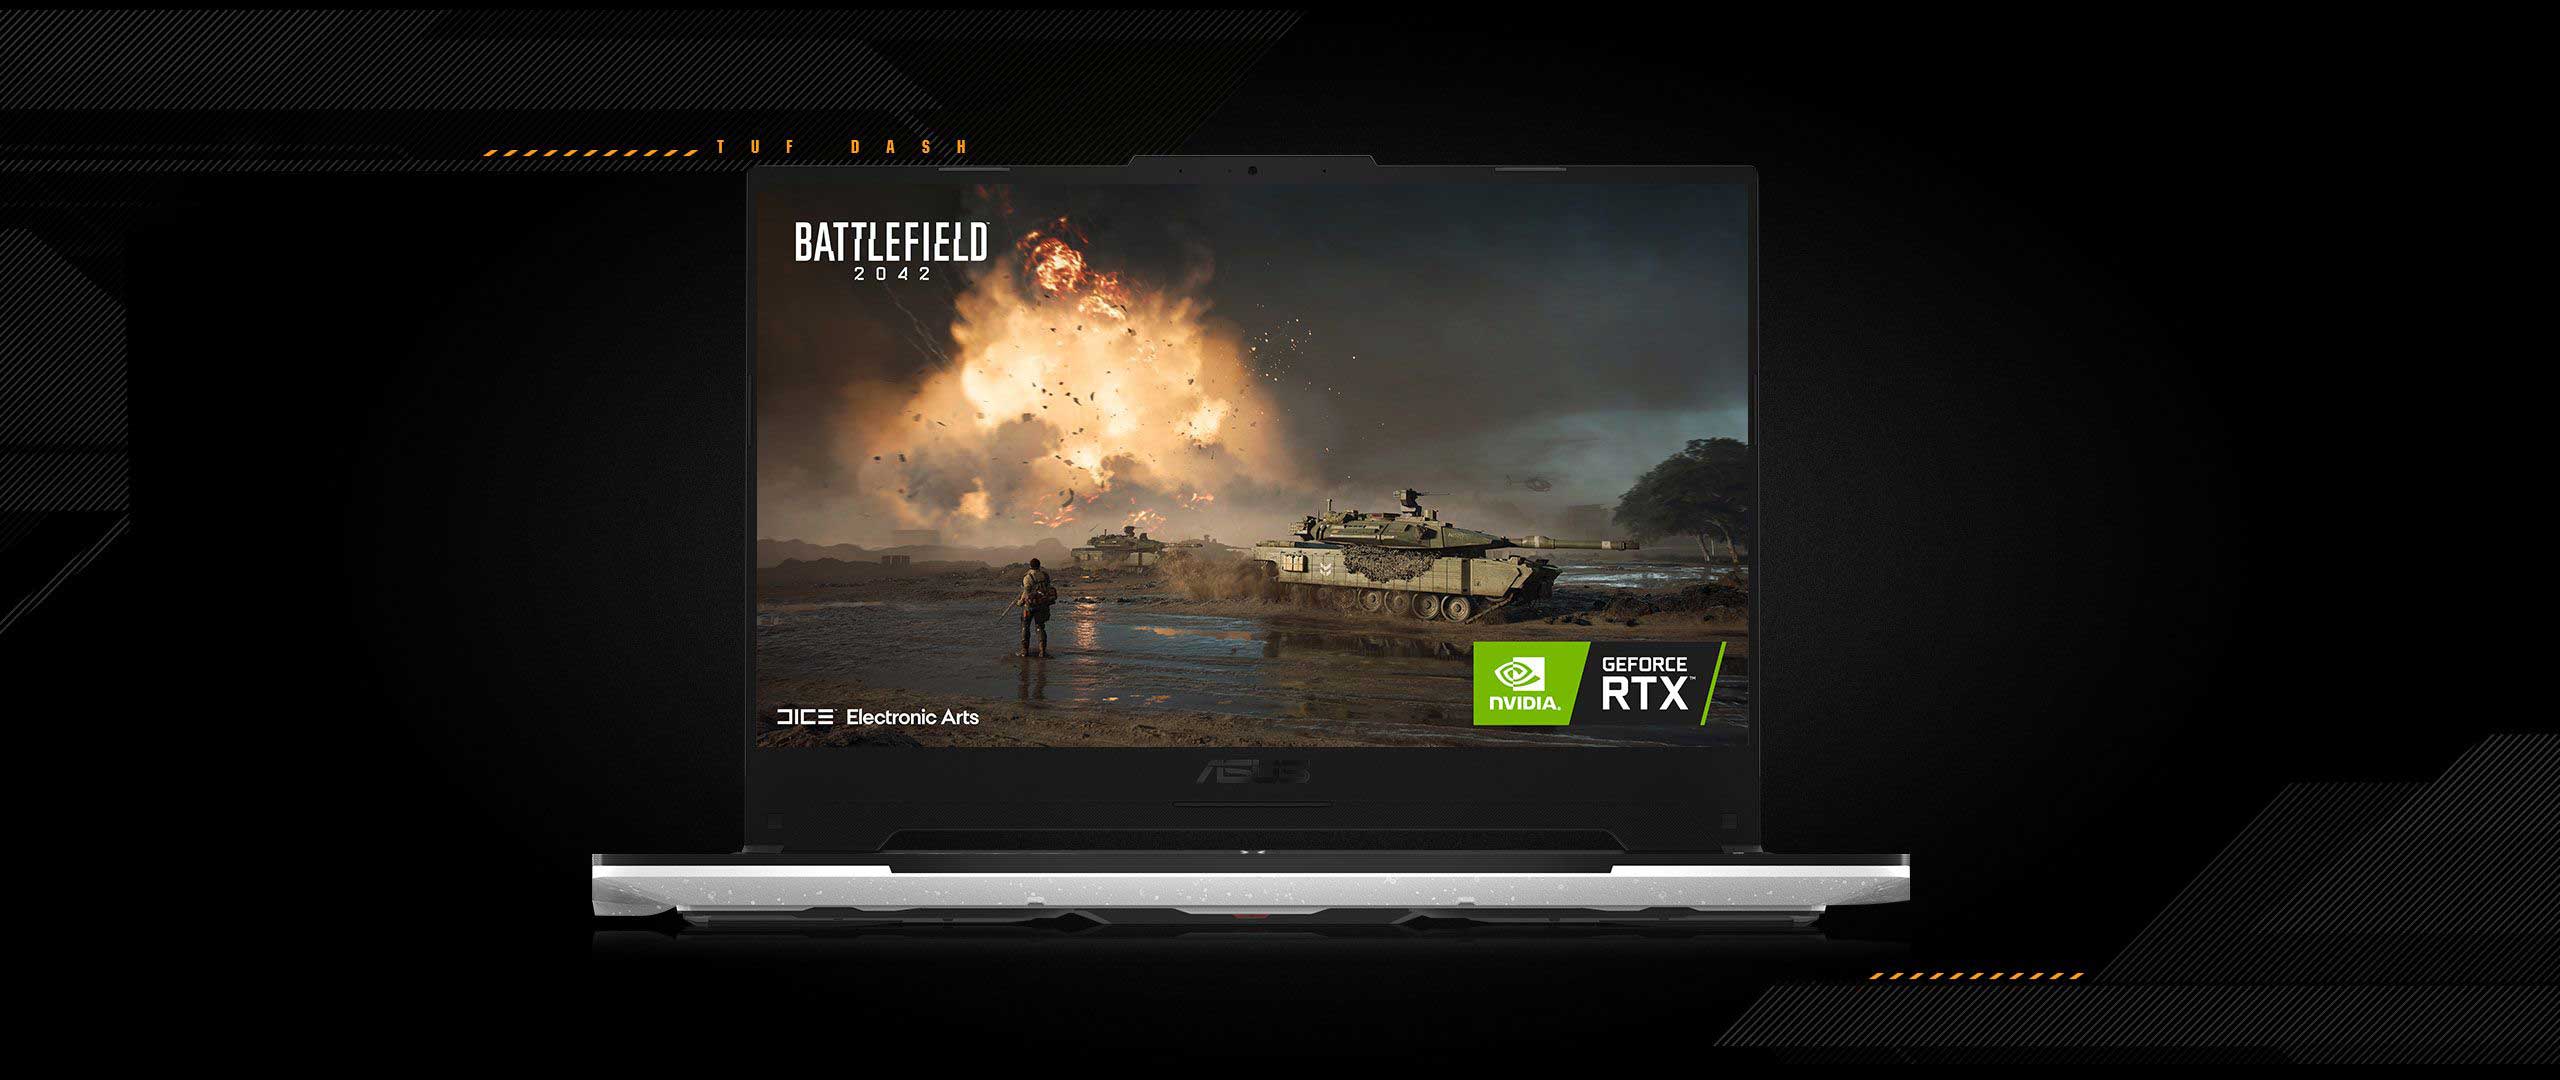 The image shows that The Battlefield 2042 is demoed staticly on the screen of ASUS TUF DASH F15 on performance section